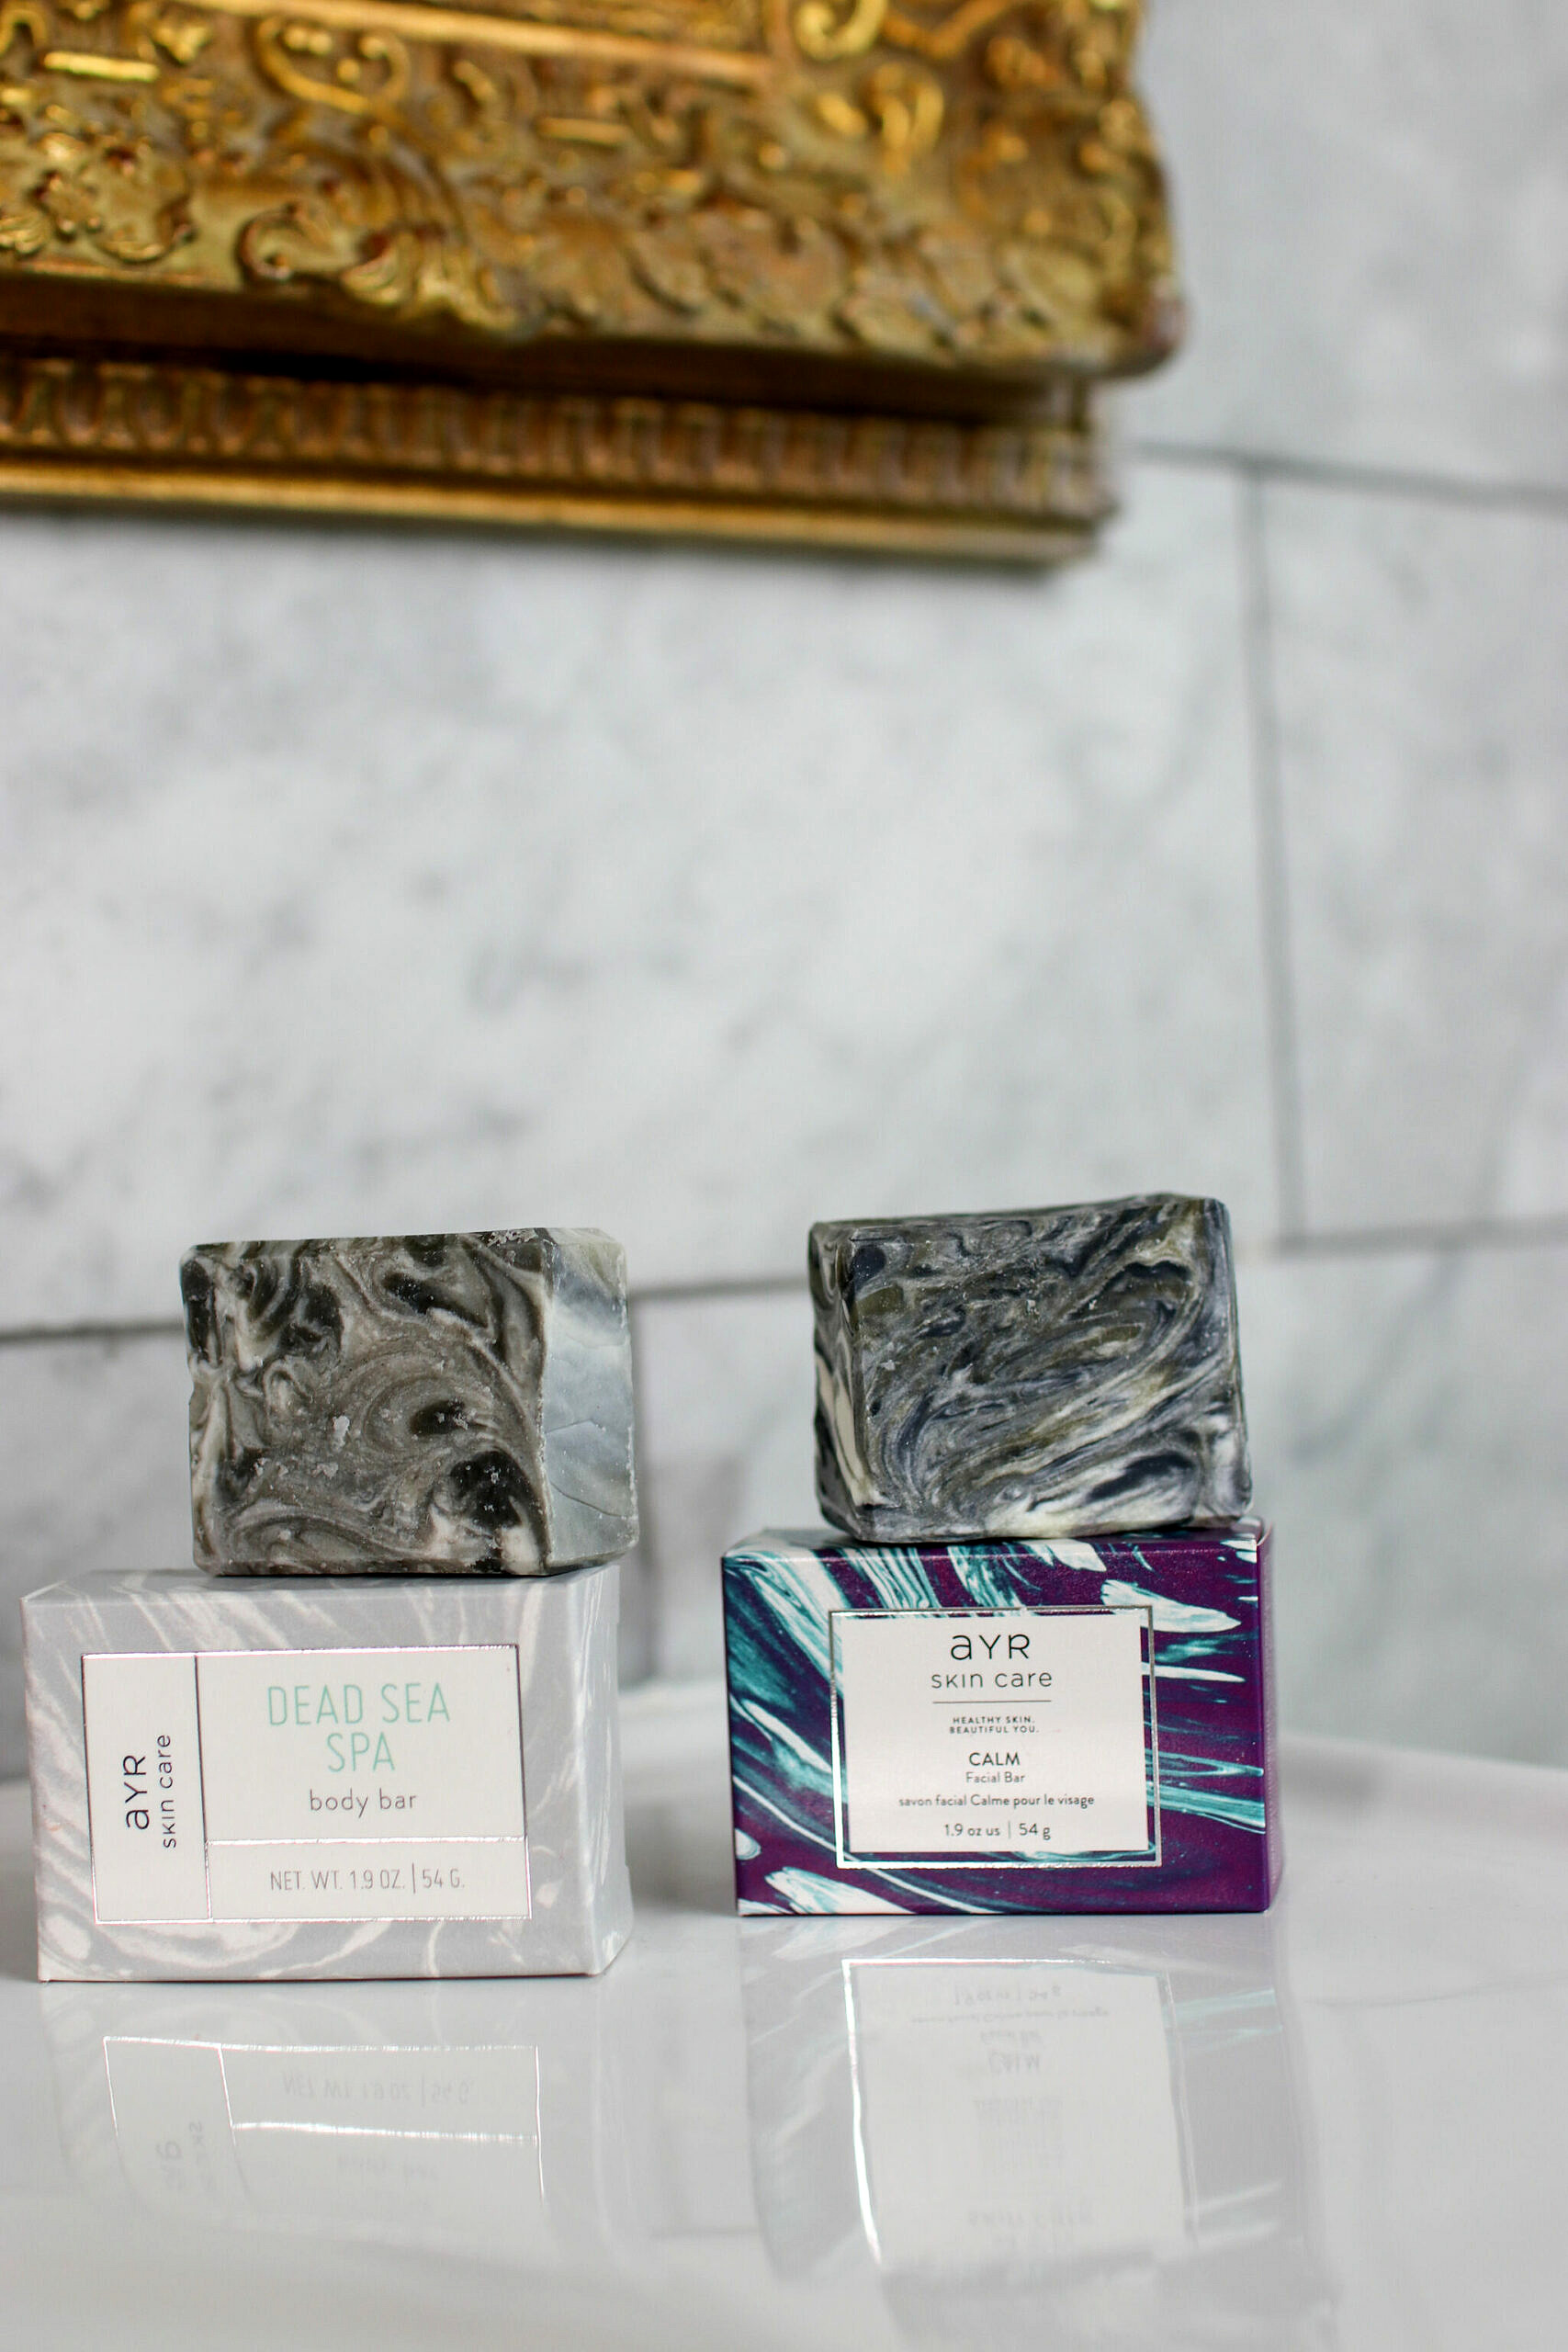 AYR Skincare Products | Organic and Carefully Sourced Natural Ingredients | Dead Sea Spa Body Bar and Calm Facial Bar 